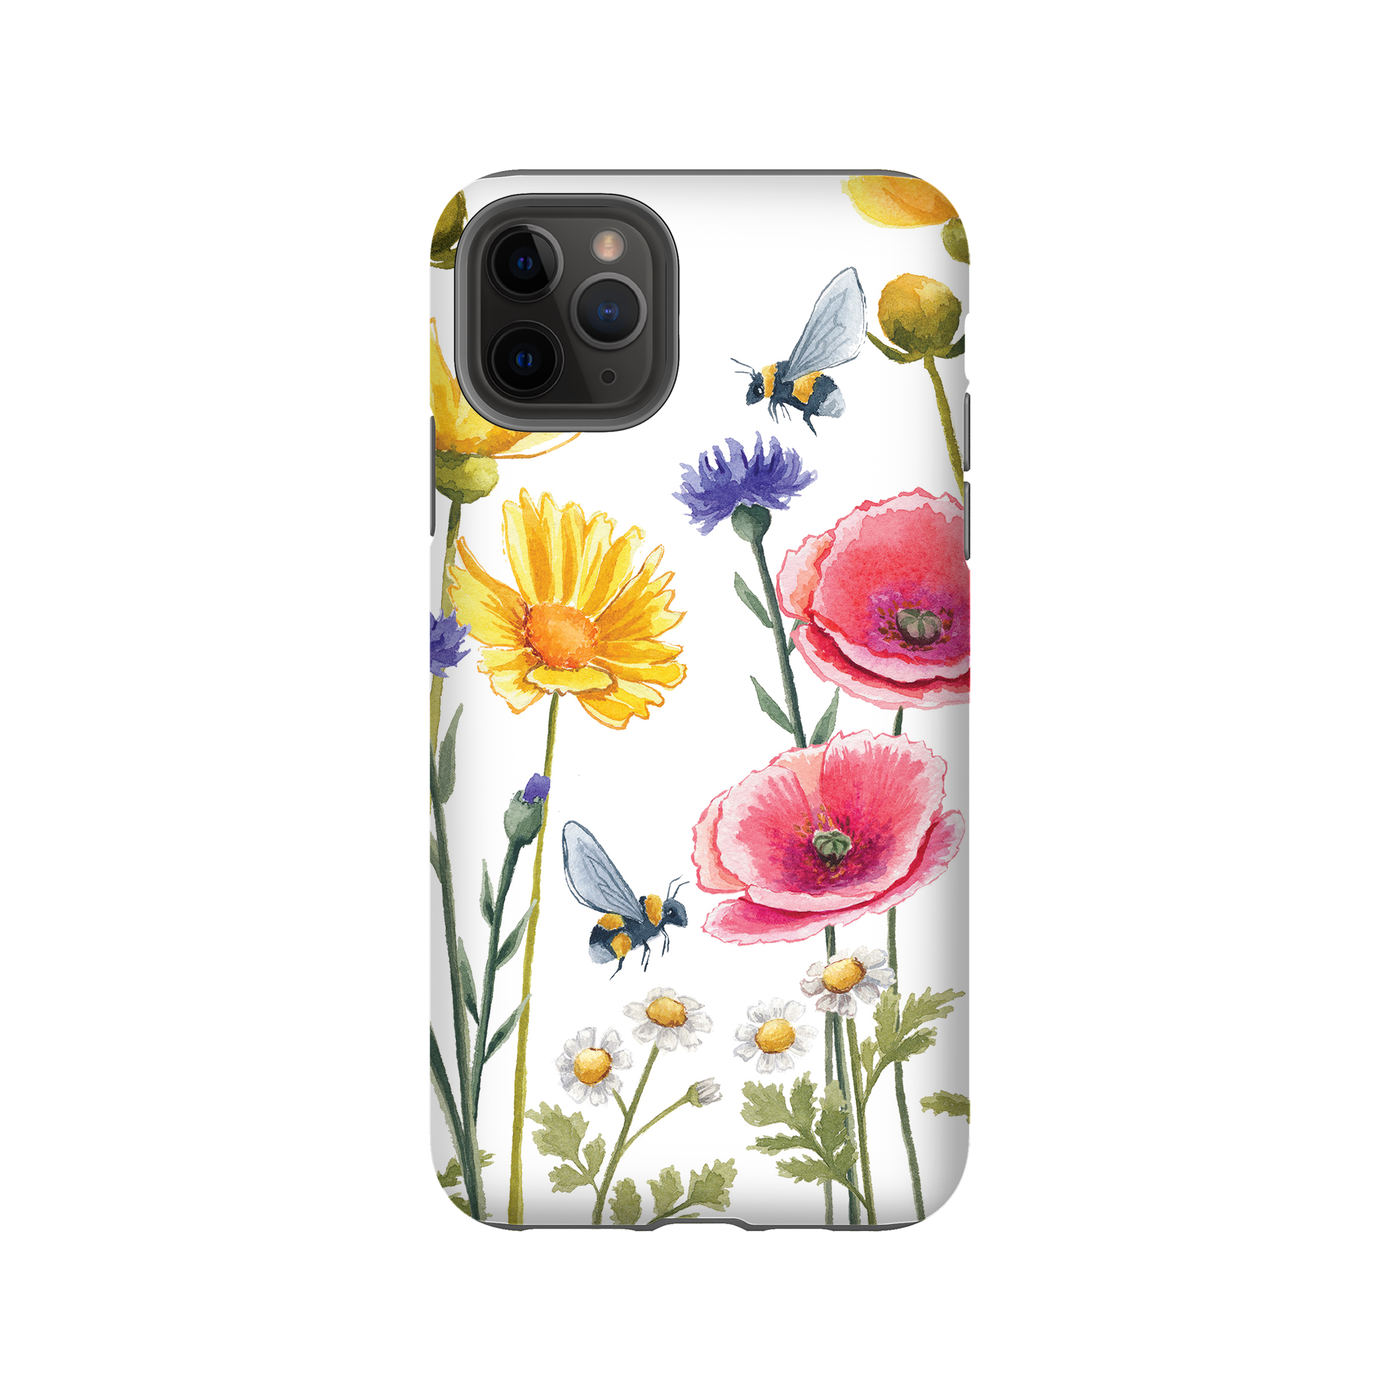 iPhone case in wildflowers and bees